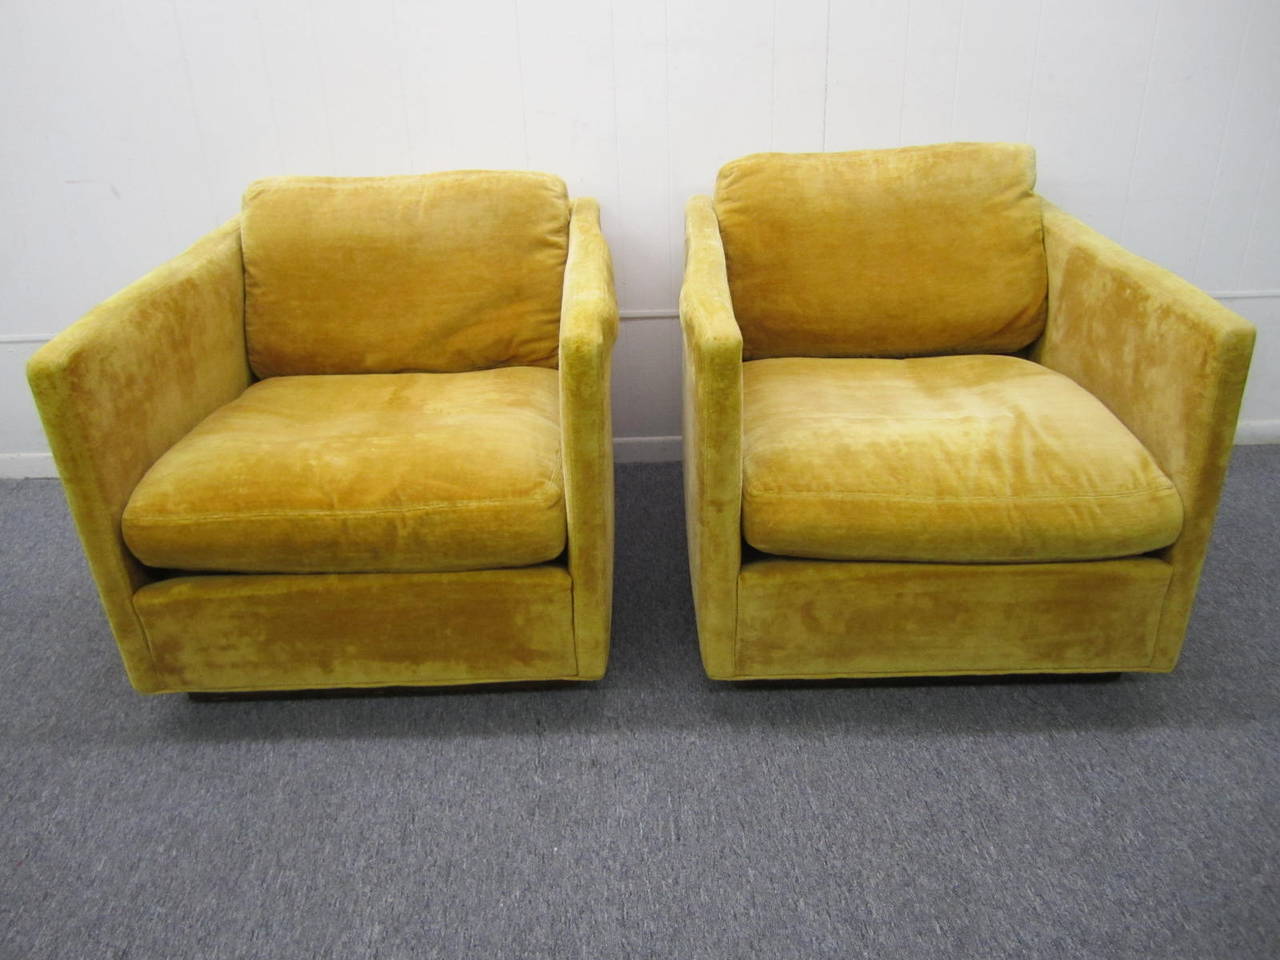 Fantastic pair of signed Milo Baughman cube lounge chairs for James Inc.  These are perfect for the designer who needs to re-upholster.  They have a wonderful walnut plinth base giving them floating appearance.  The bases can be chrome plated for a